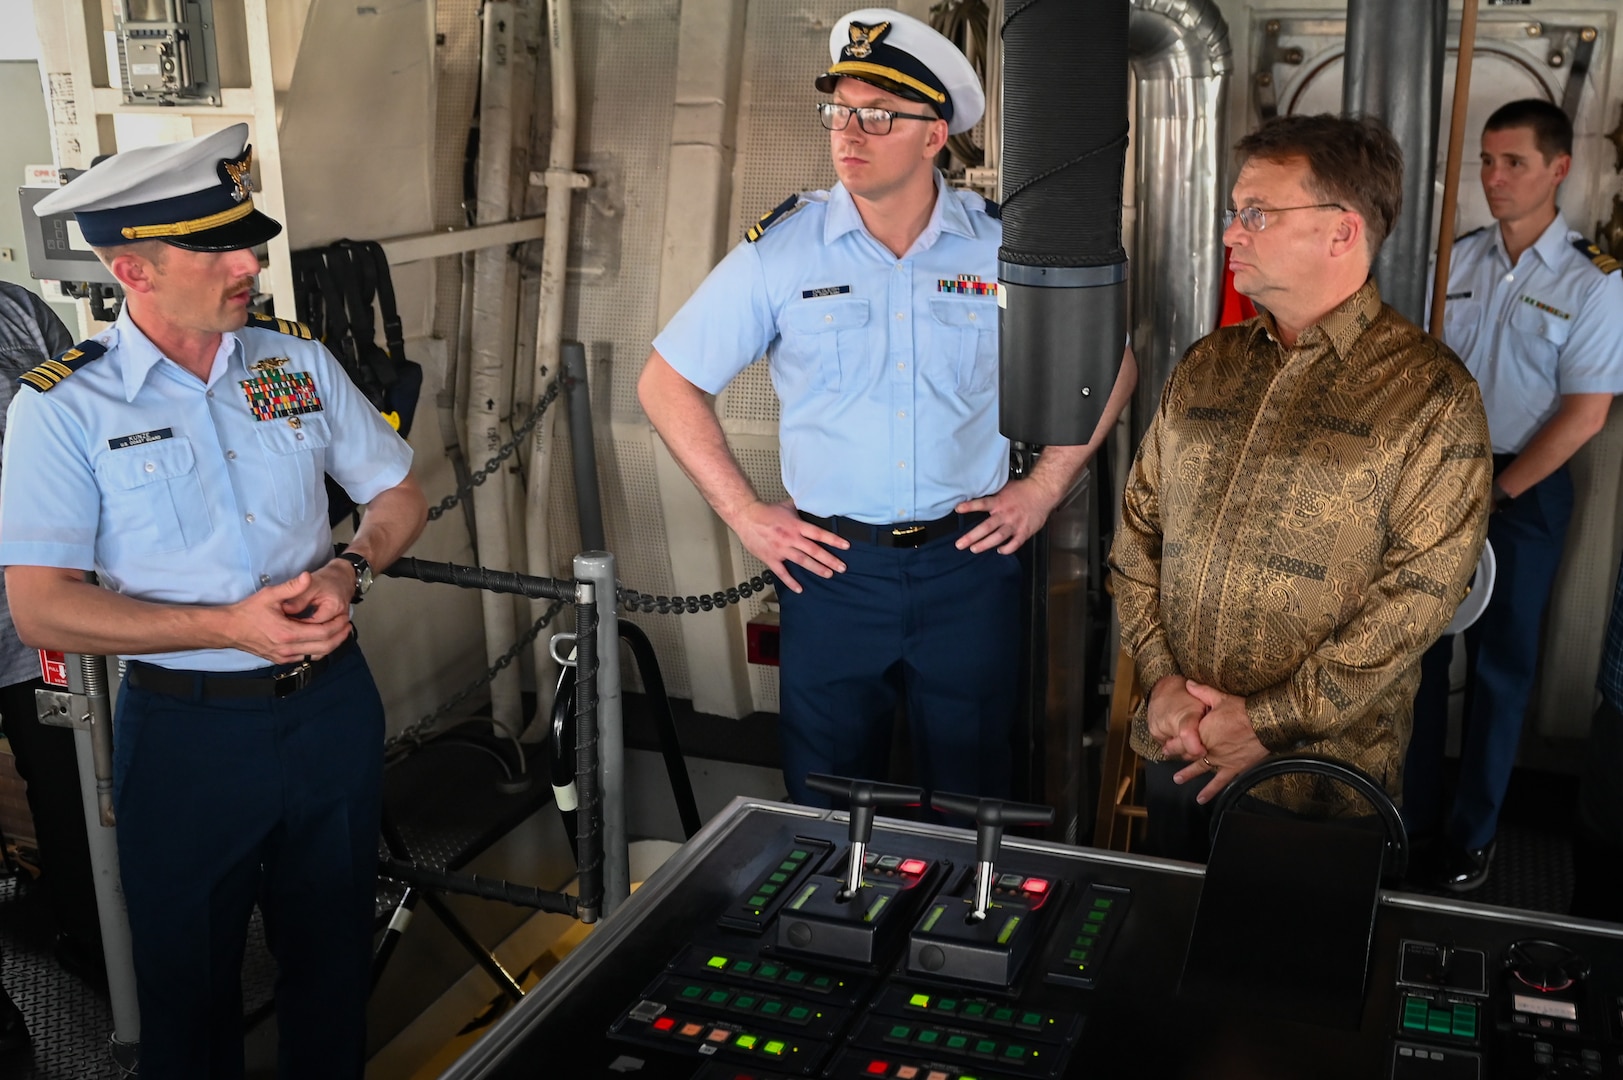 Lt. Cmdr. Philipp Kunze, operations officer aboard U.S. Coast Guard Cutter Bertholf (WMSL 750), speaks to Edgard D. Kagan, U.S. Ambassador-designate to Malaysia, about the helm controls of the Bertholf during a tour while the cutter was moored at Port Klang, Malaysia, March 2, 2024. The Bertholf is a National Security Cutter homeported in Alameda, Calif. (U.S. Coast Guard photo by Petty Officer Steve Strohmaier)